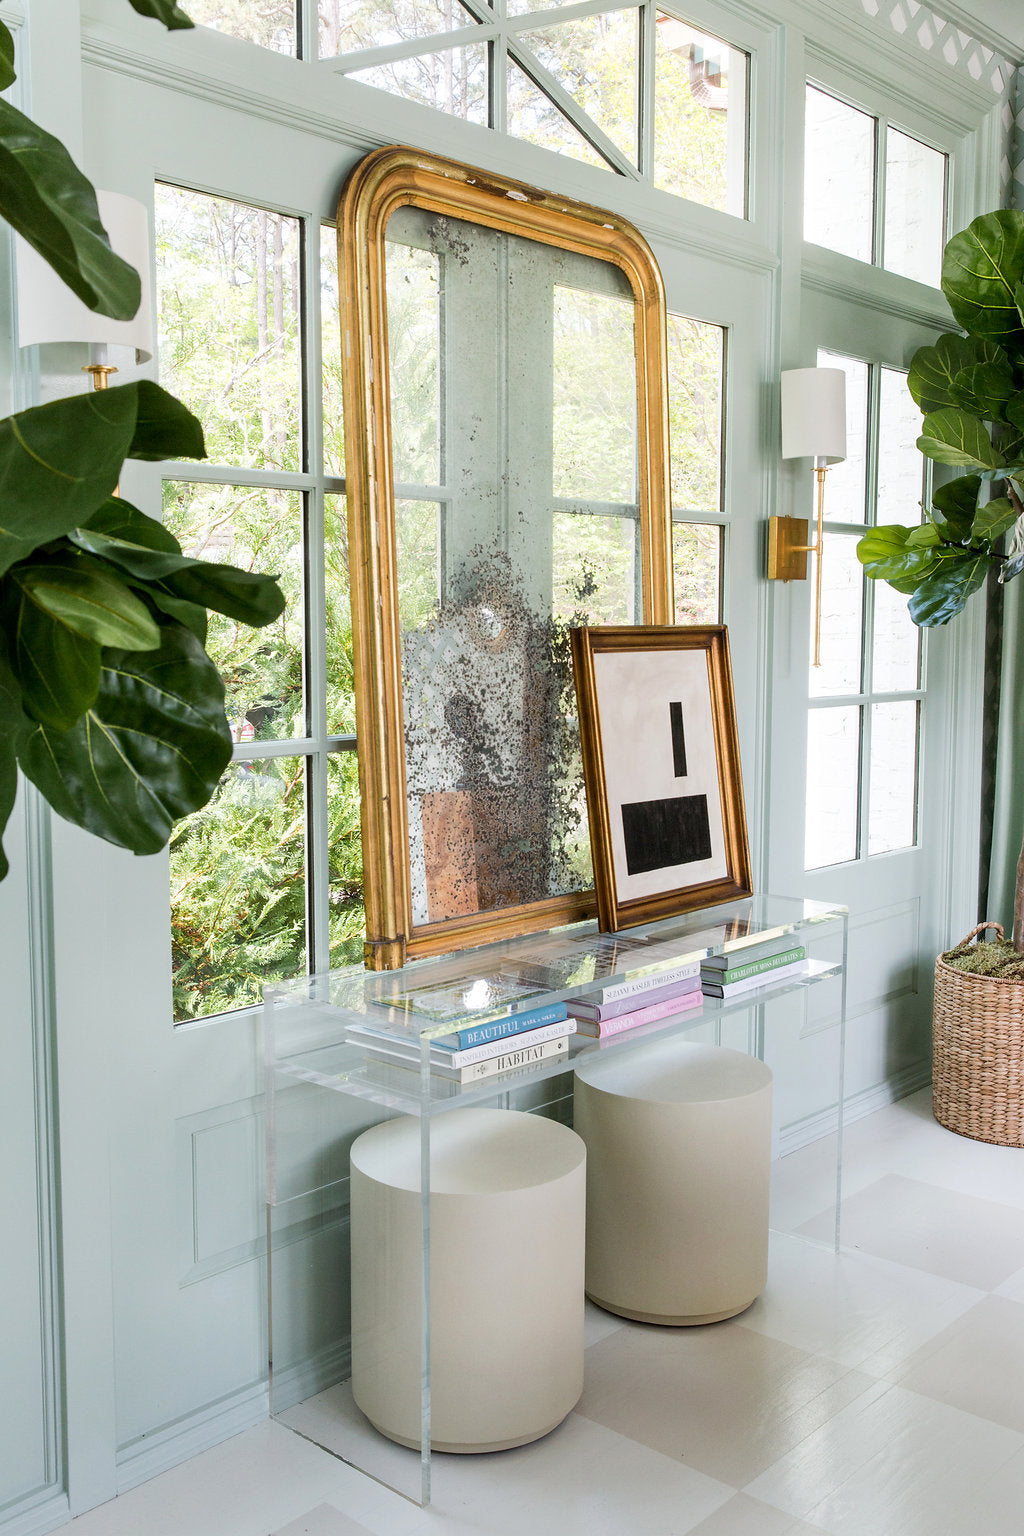 Every room should have at least one antique (and we love the juxtaposition of the Louis Philippe mirror and the lucite console – so chic). Photo by Anna Routh (http://annarouth.com)